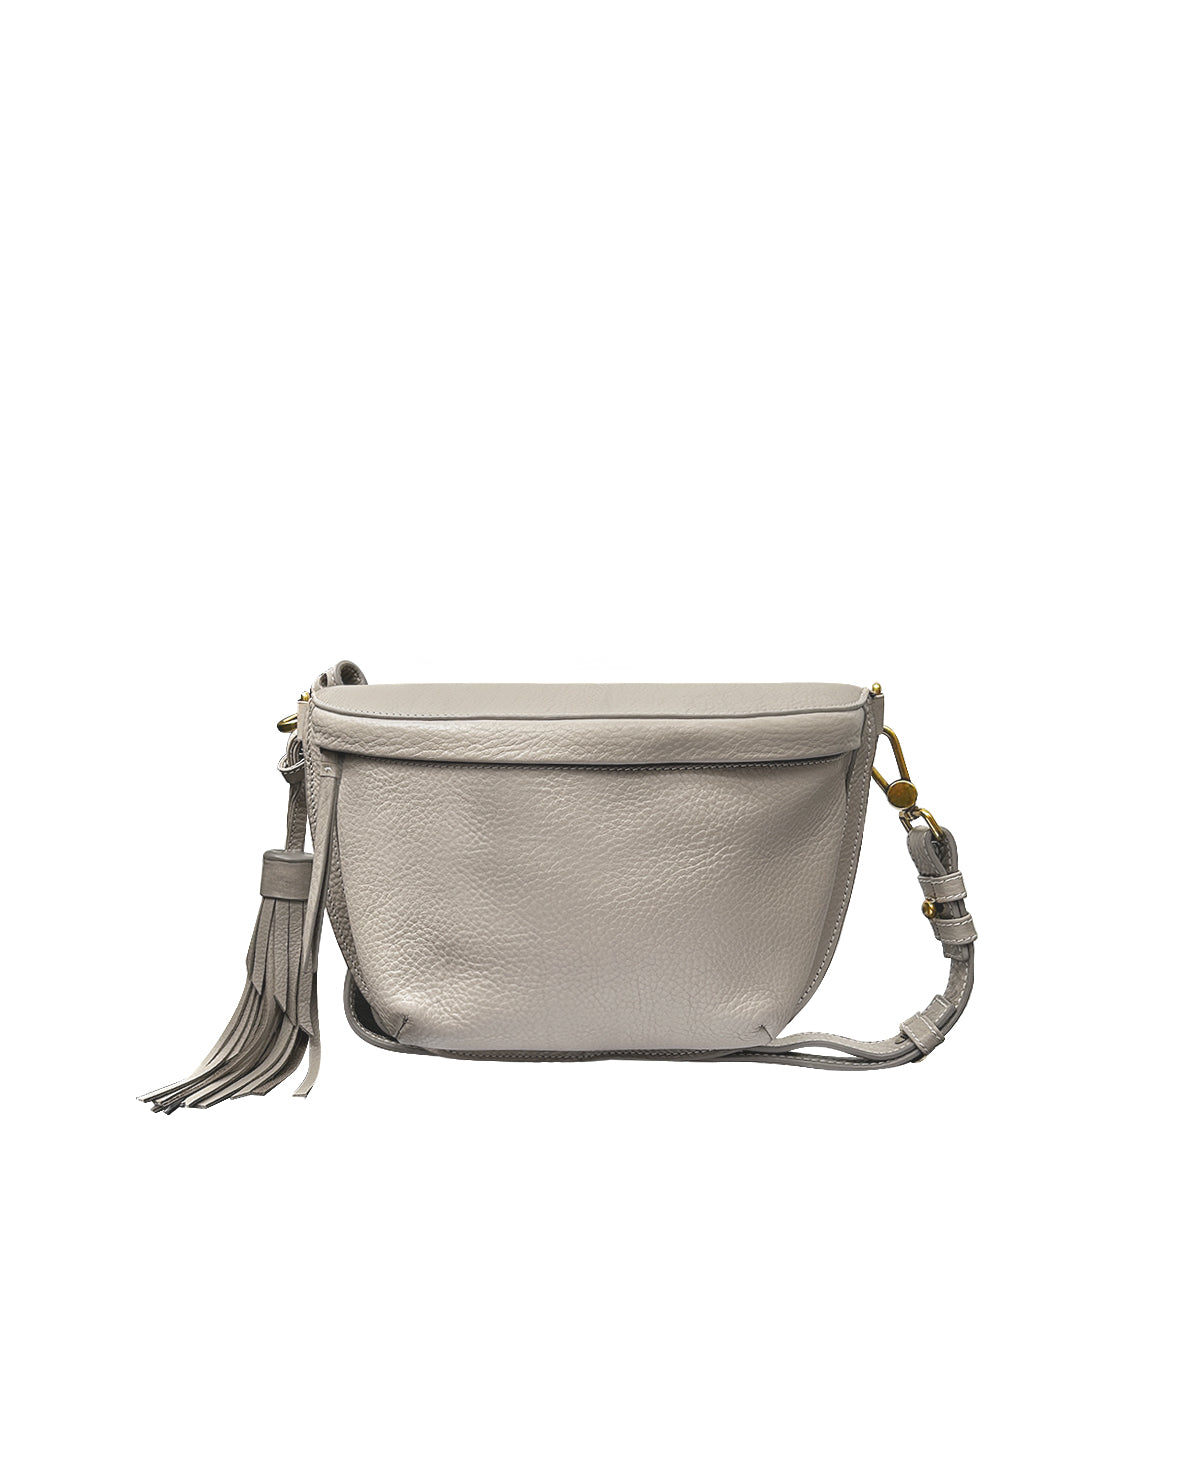 Fem Taupe Leather Fanny pack - Crossbody